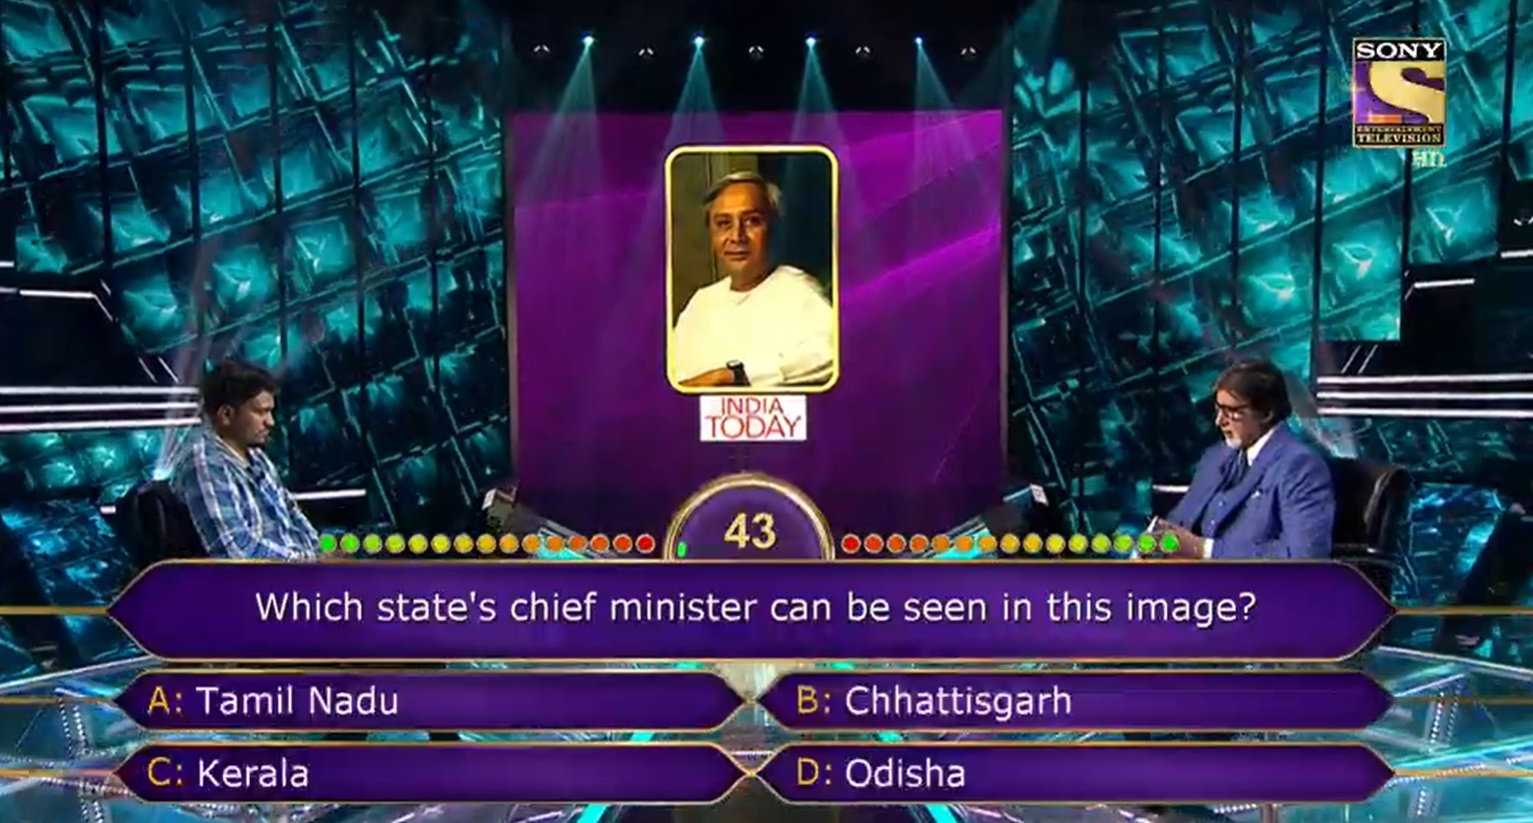 Ques : Which state’s chief minister can be seen in this image?